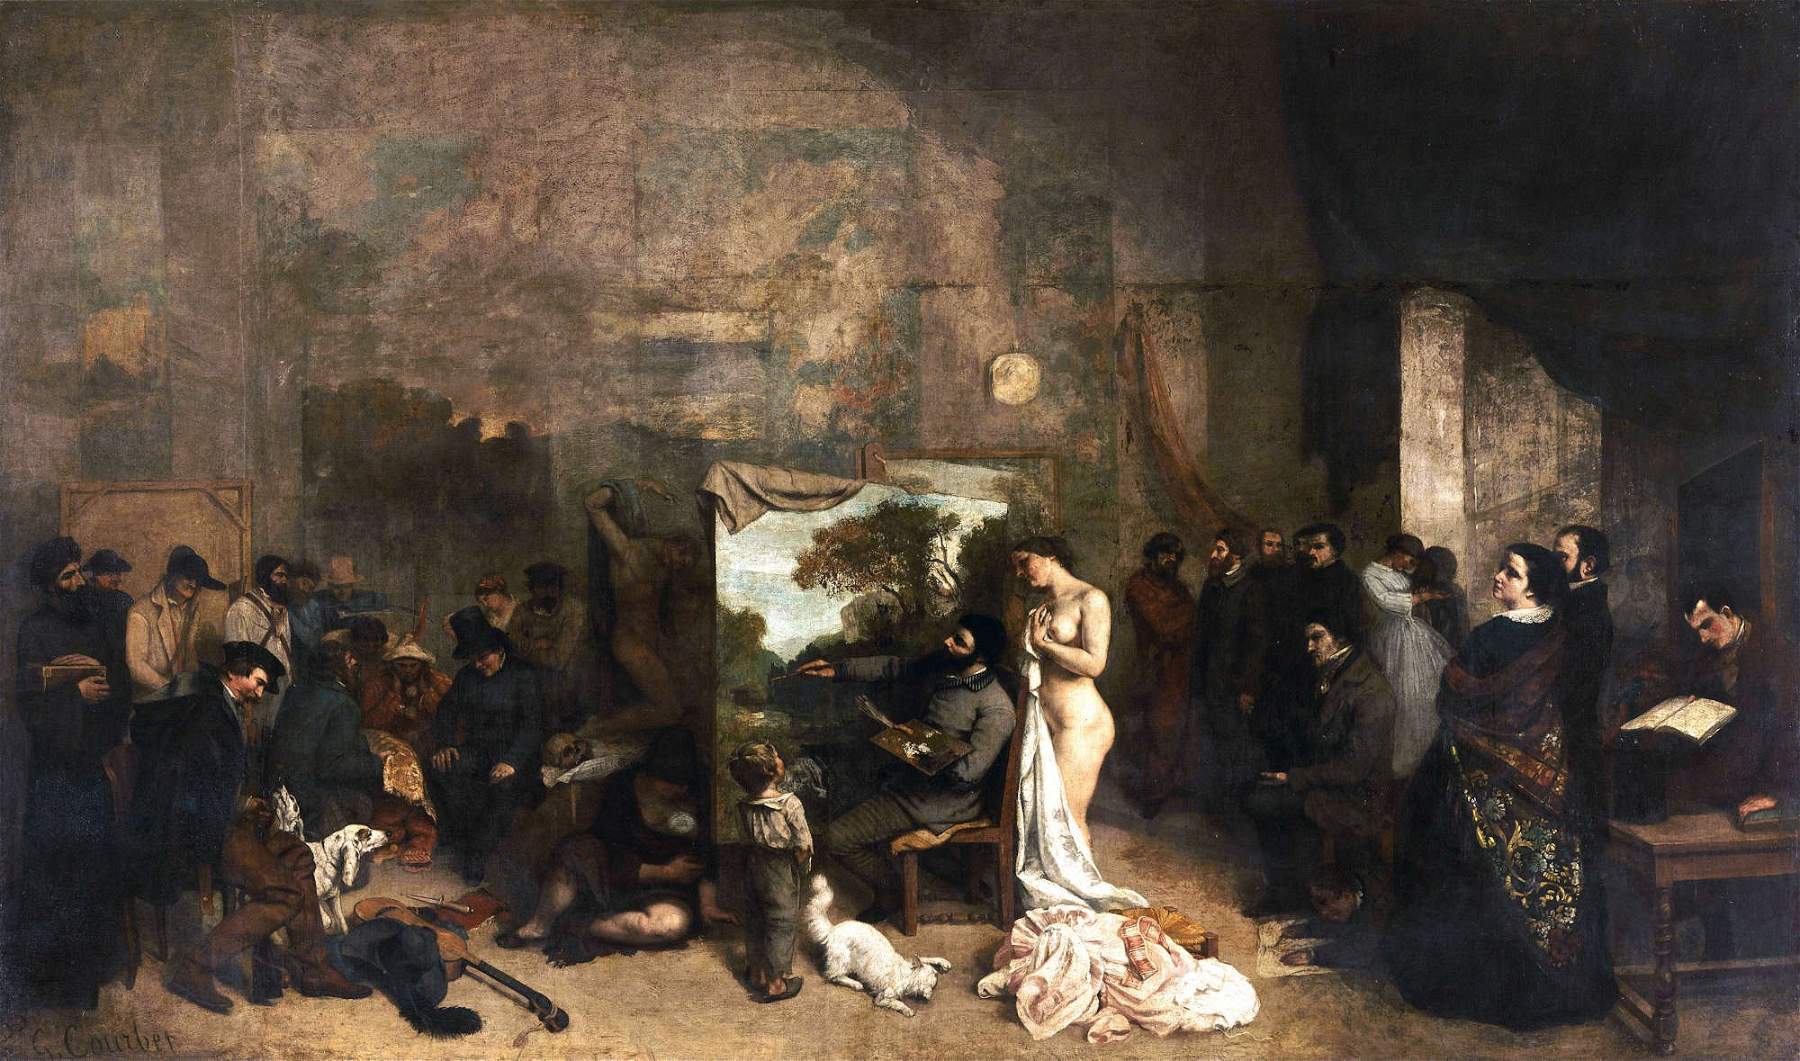 Gustave Courbet, life, works and style of the father of realism